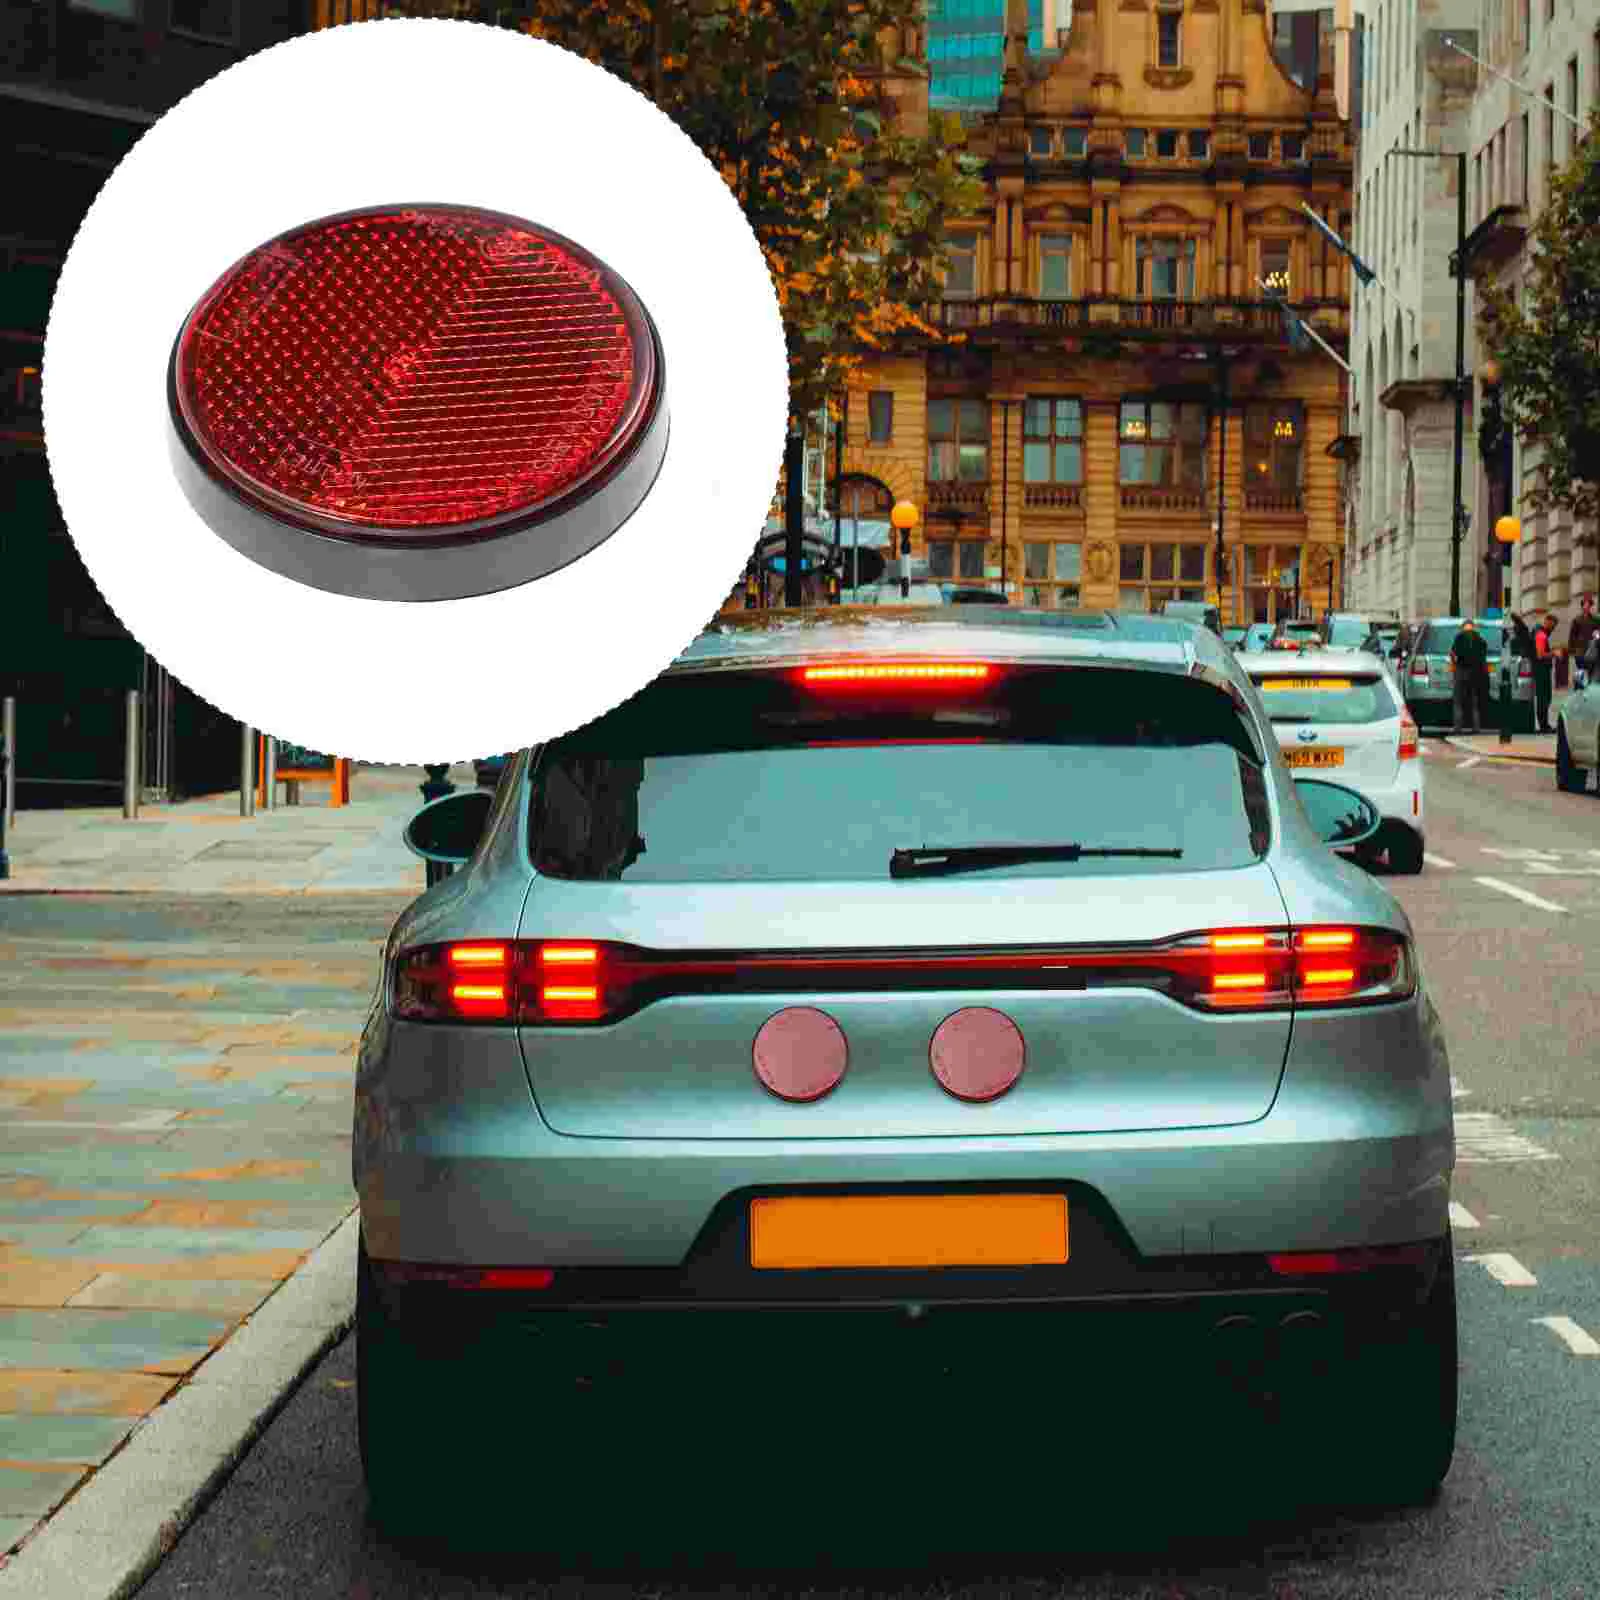 

Round Reflector Reflectors for Post Driveway Reflective Markers Car Red Universal Truck Industrial Warning Signs Emblems